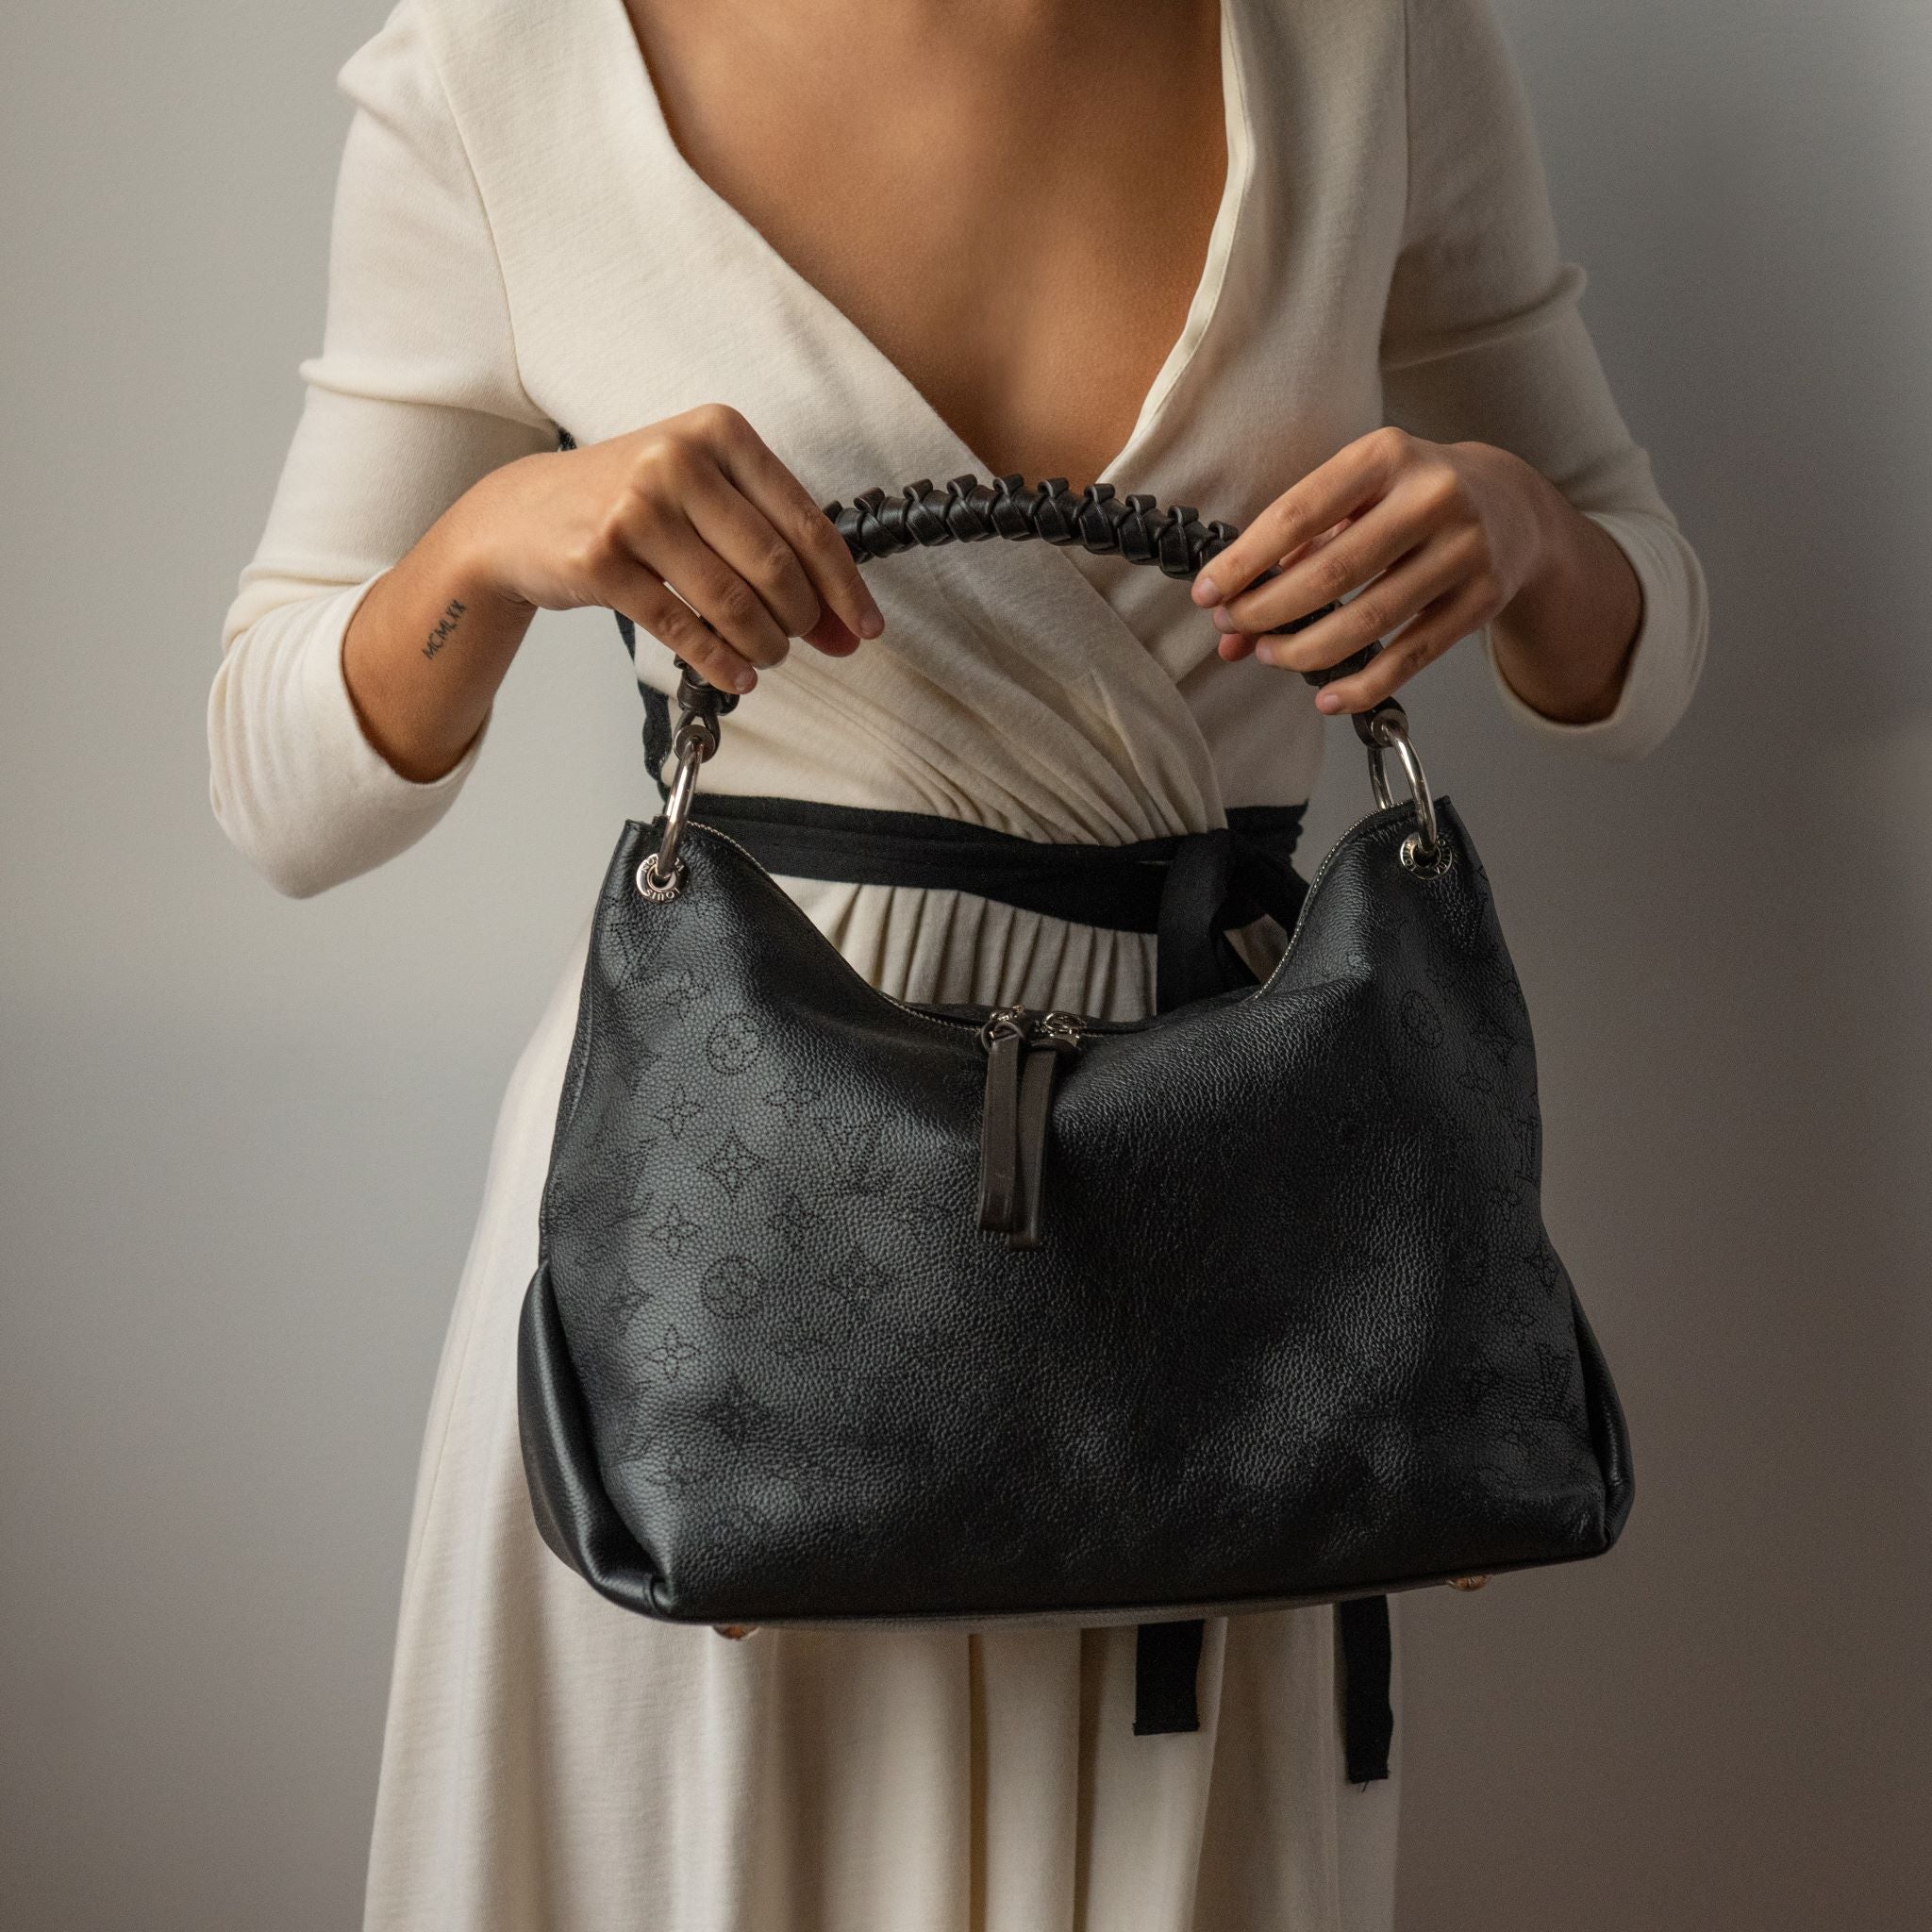 Thoughts on the new beaubourg hobo mini